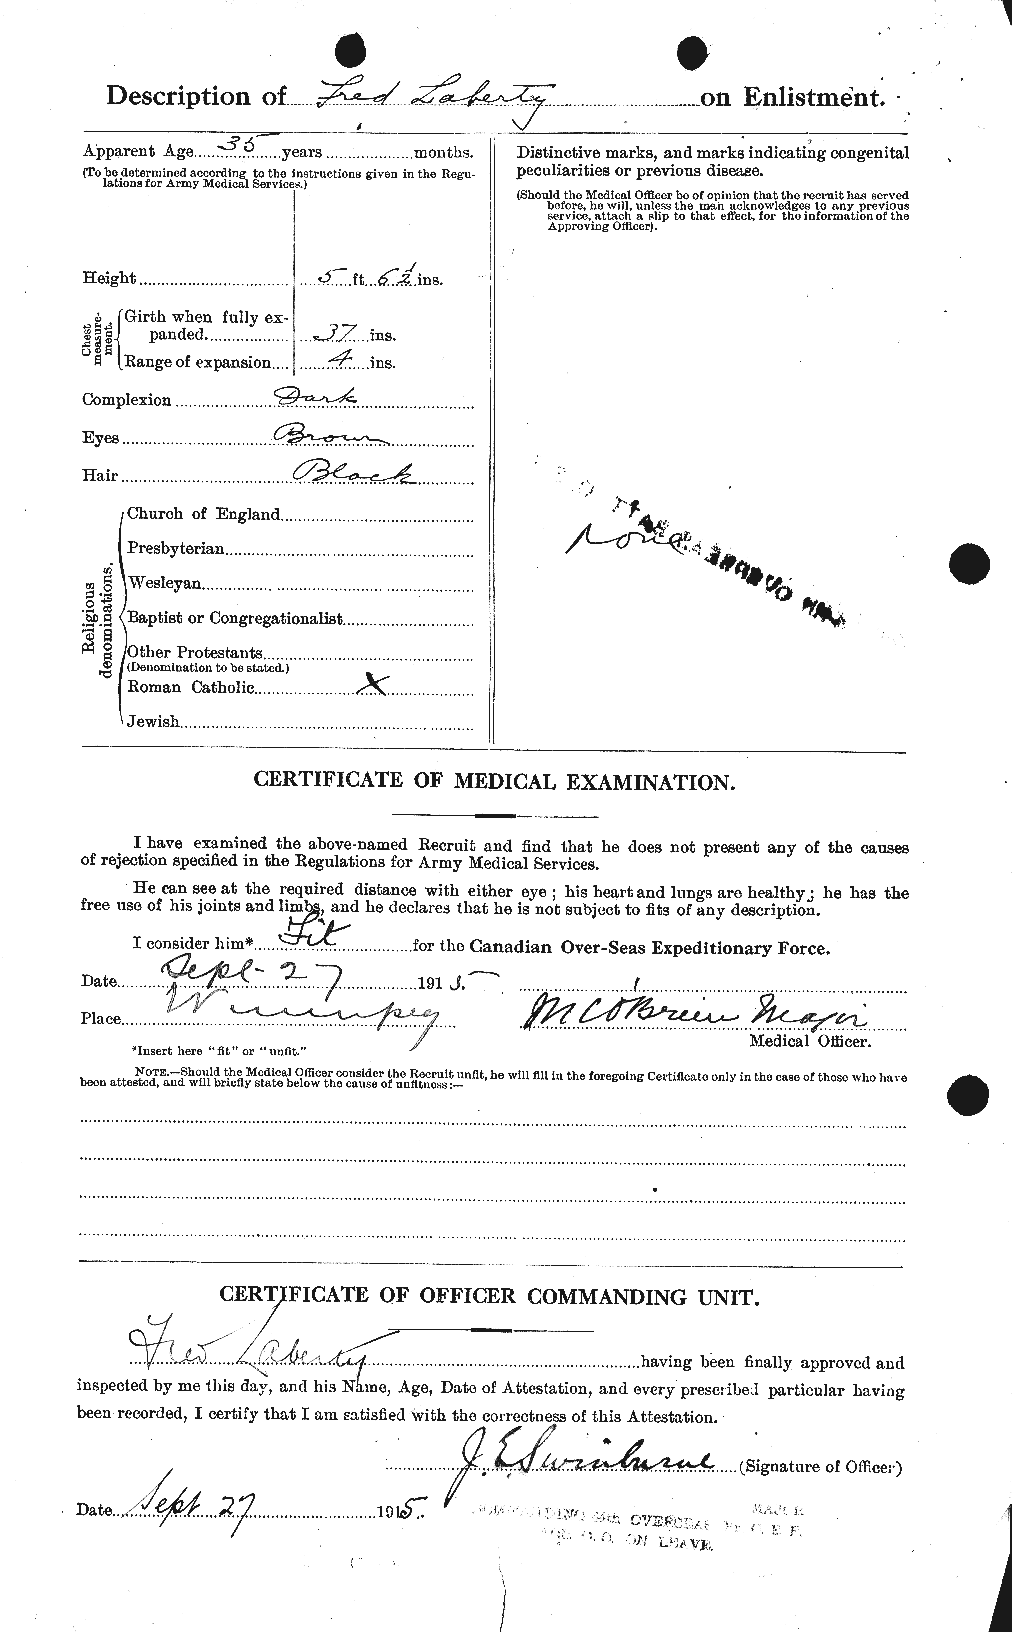 Personnel Records of the First World War - CEF 441738b